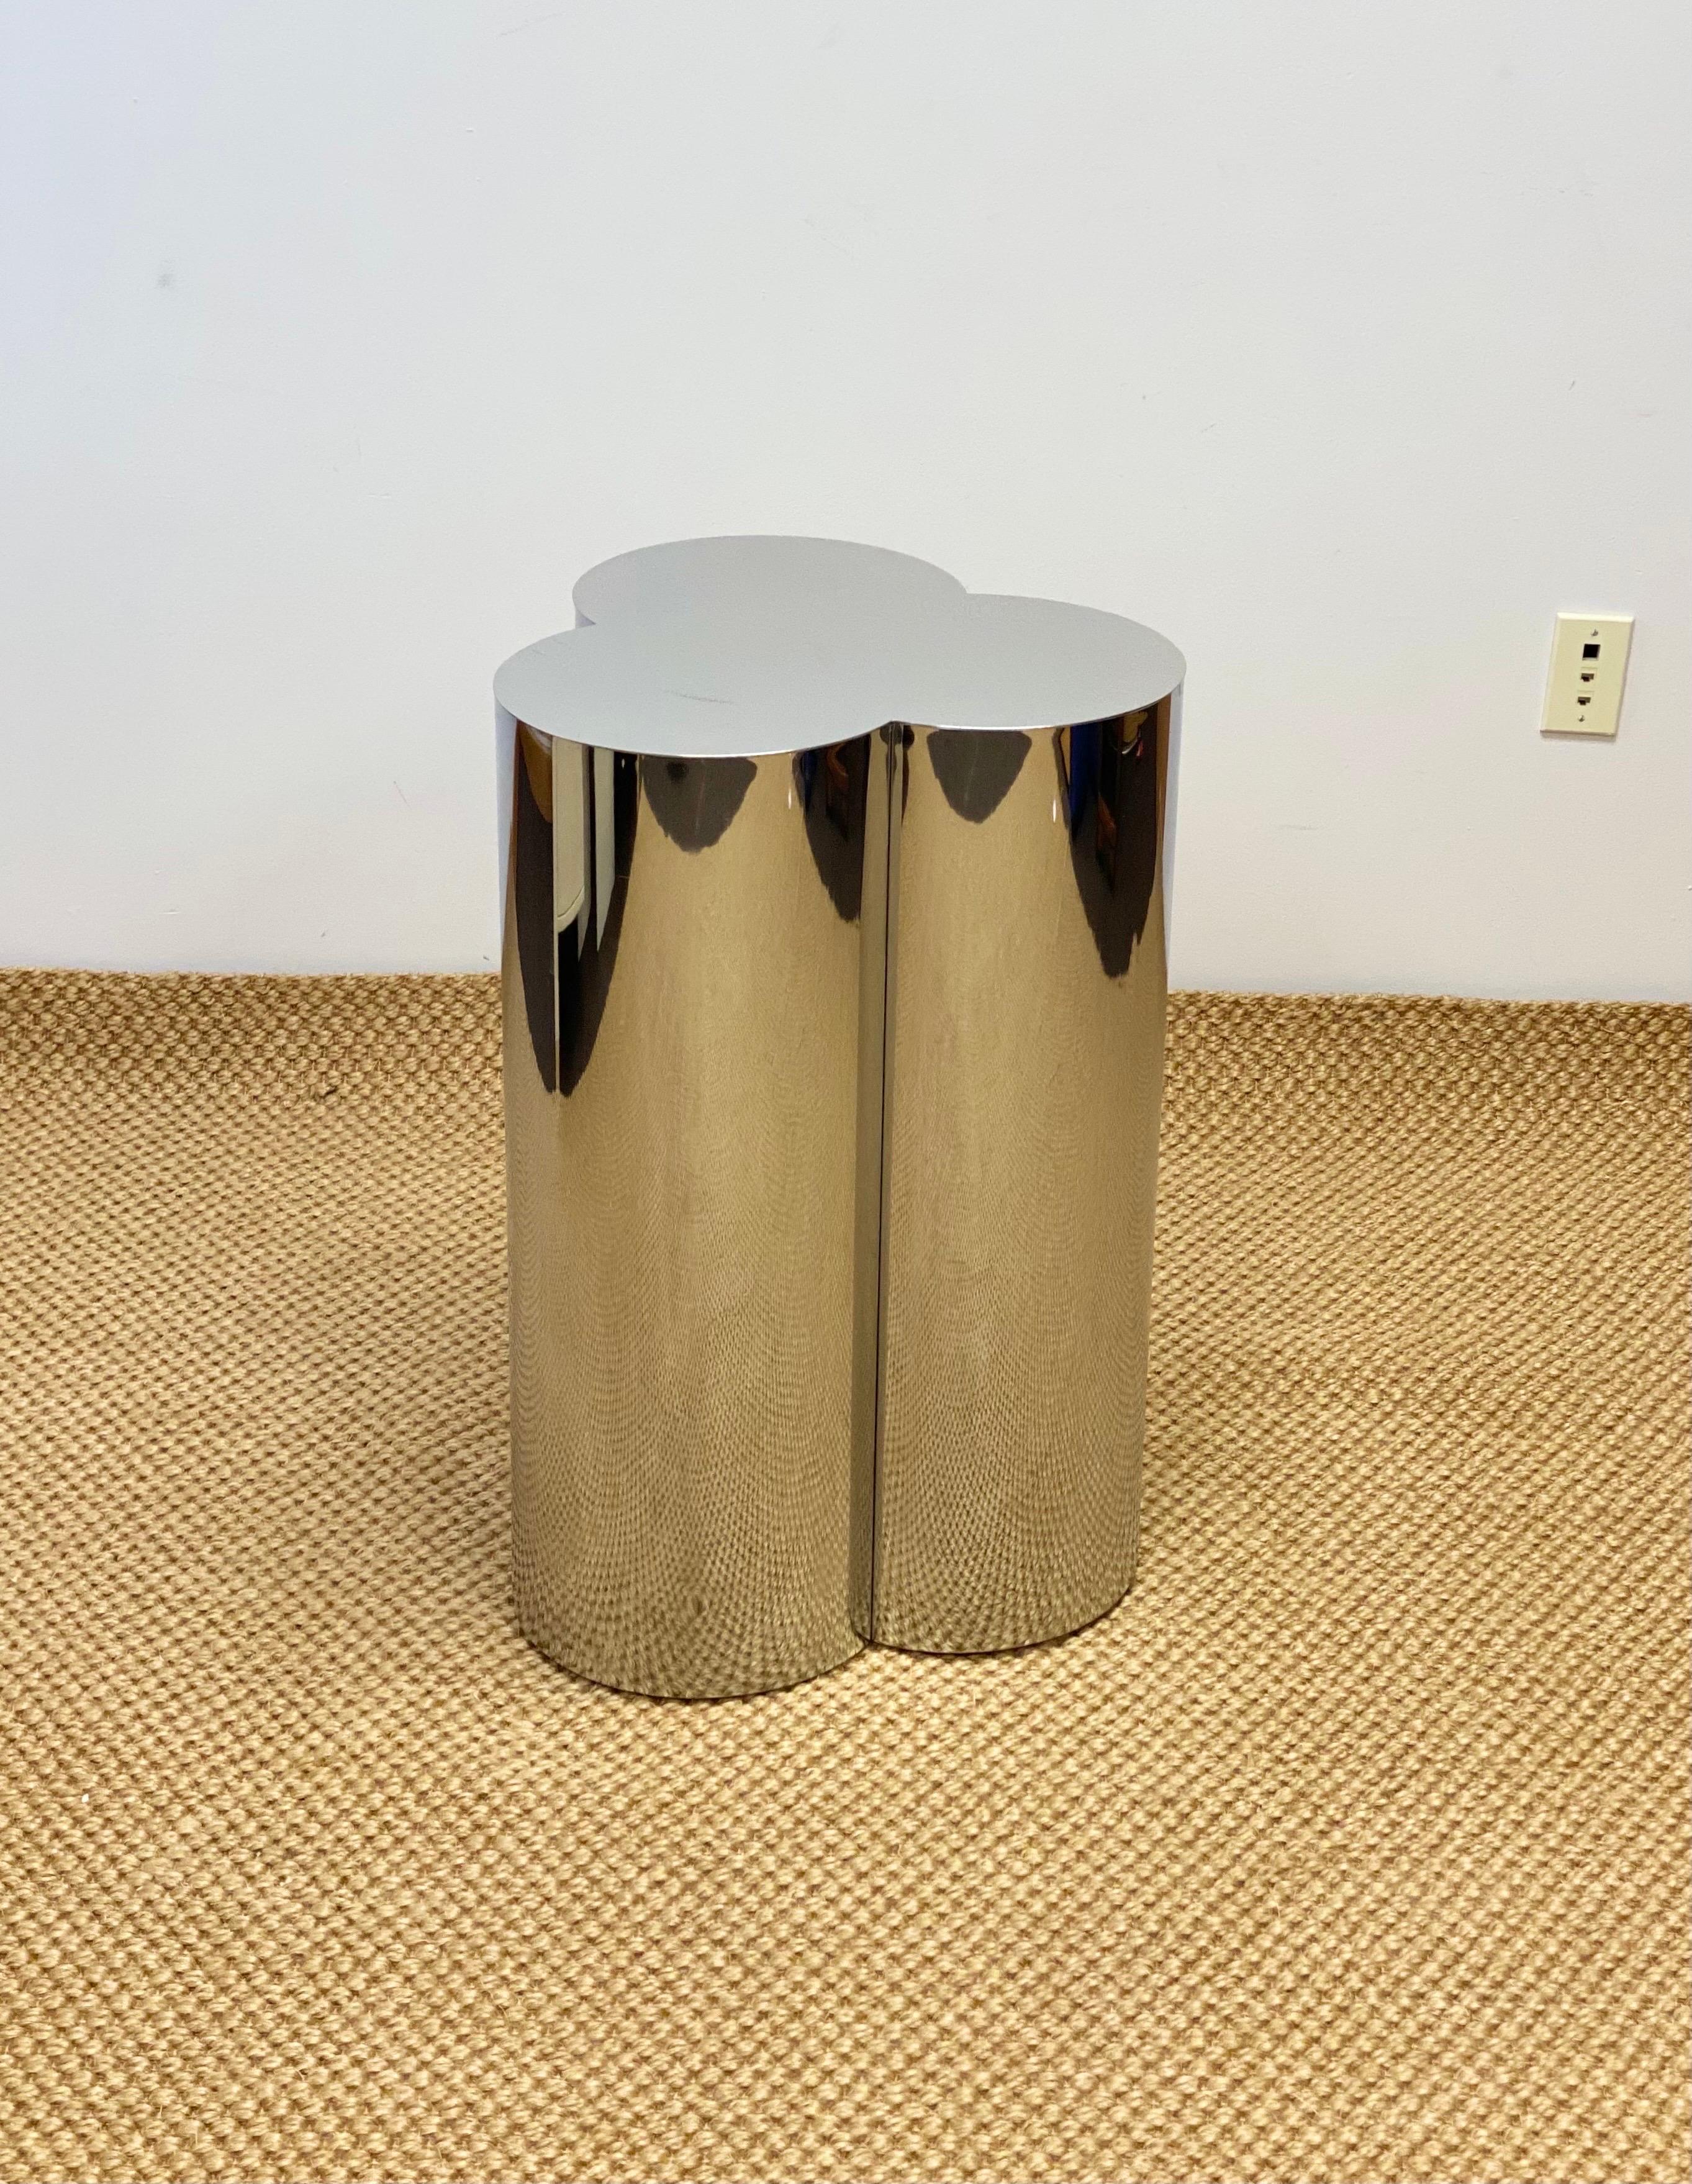 We are very pleased to offer a sculptural chrome pedestal table attributed to Curtis Jere, circa the 1960s. This tubular trefoil with a shiny, reflective surface is a Classic midcentury design and a testament to modern simplicity. Its Minimalist